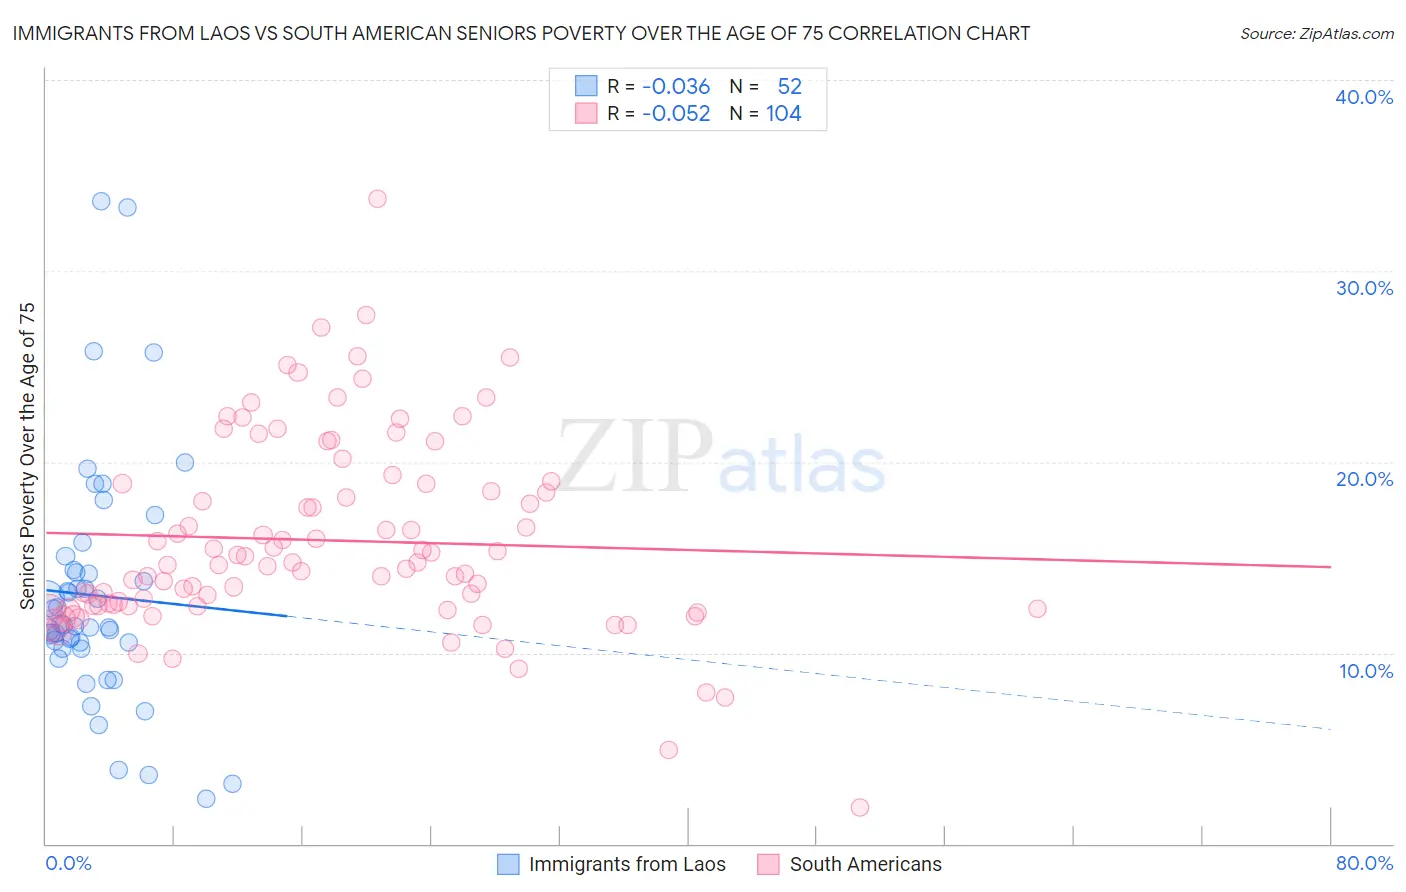 Immigrants from Laos vs South American Seniors Poverty Over the Age of 75